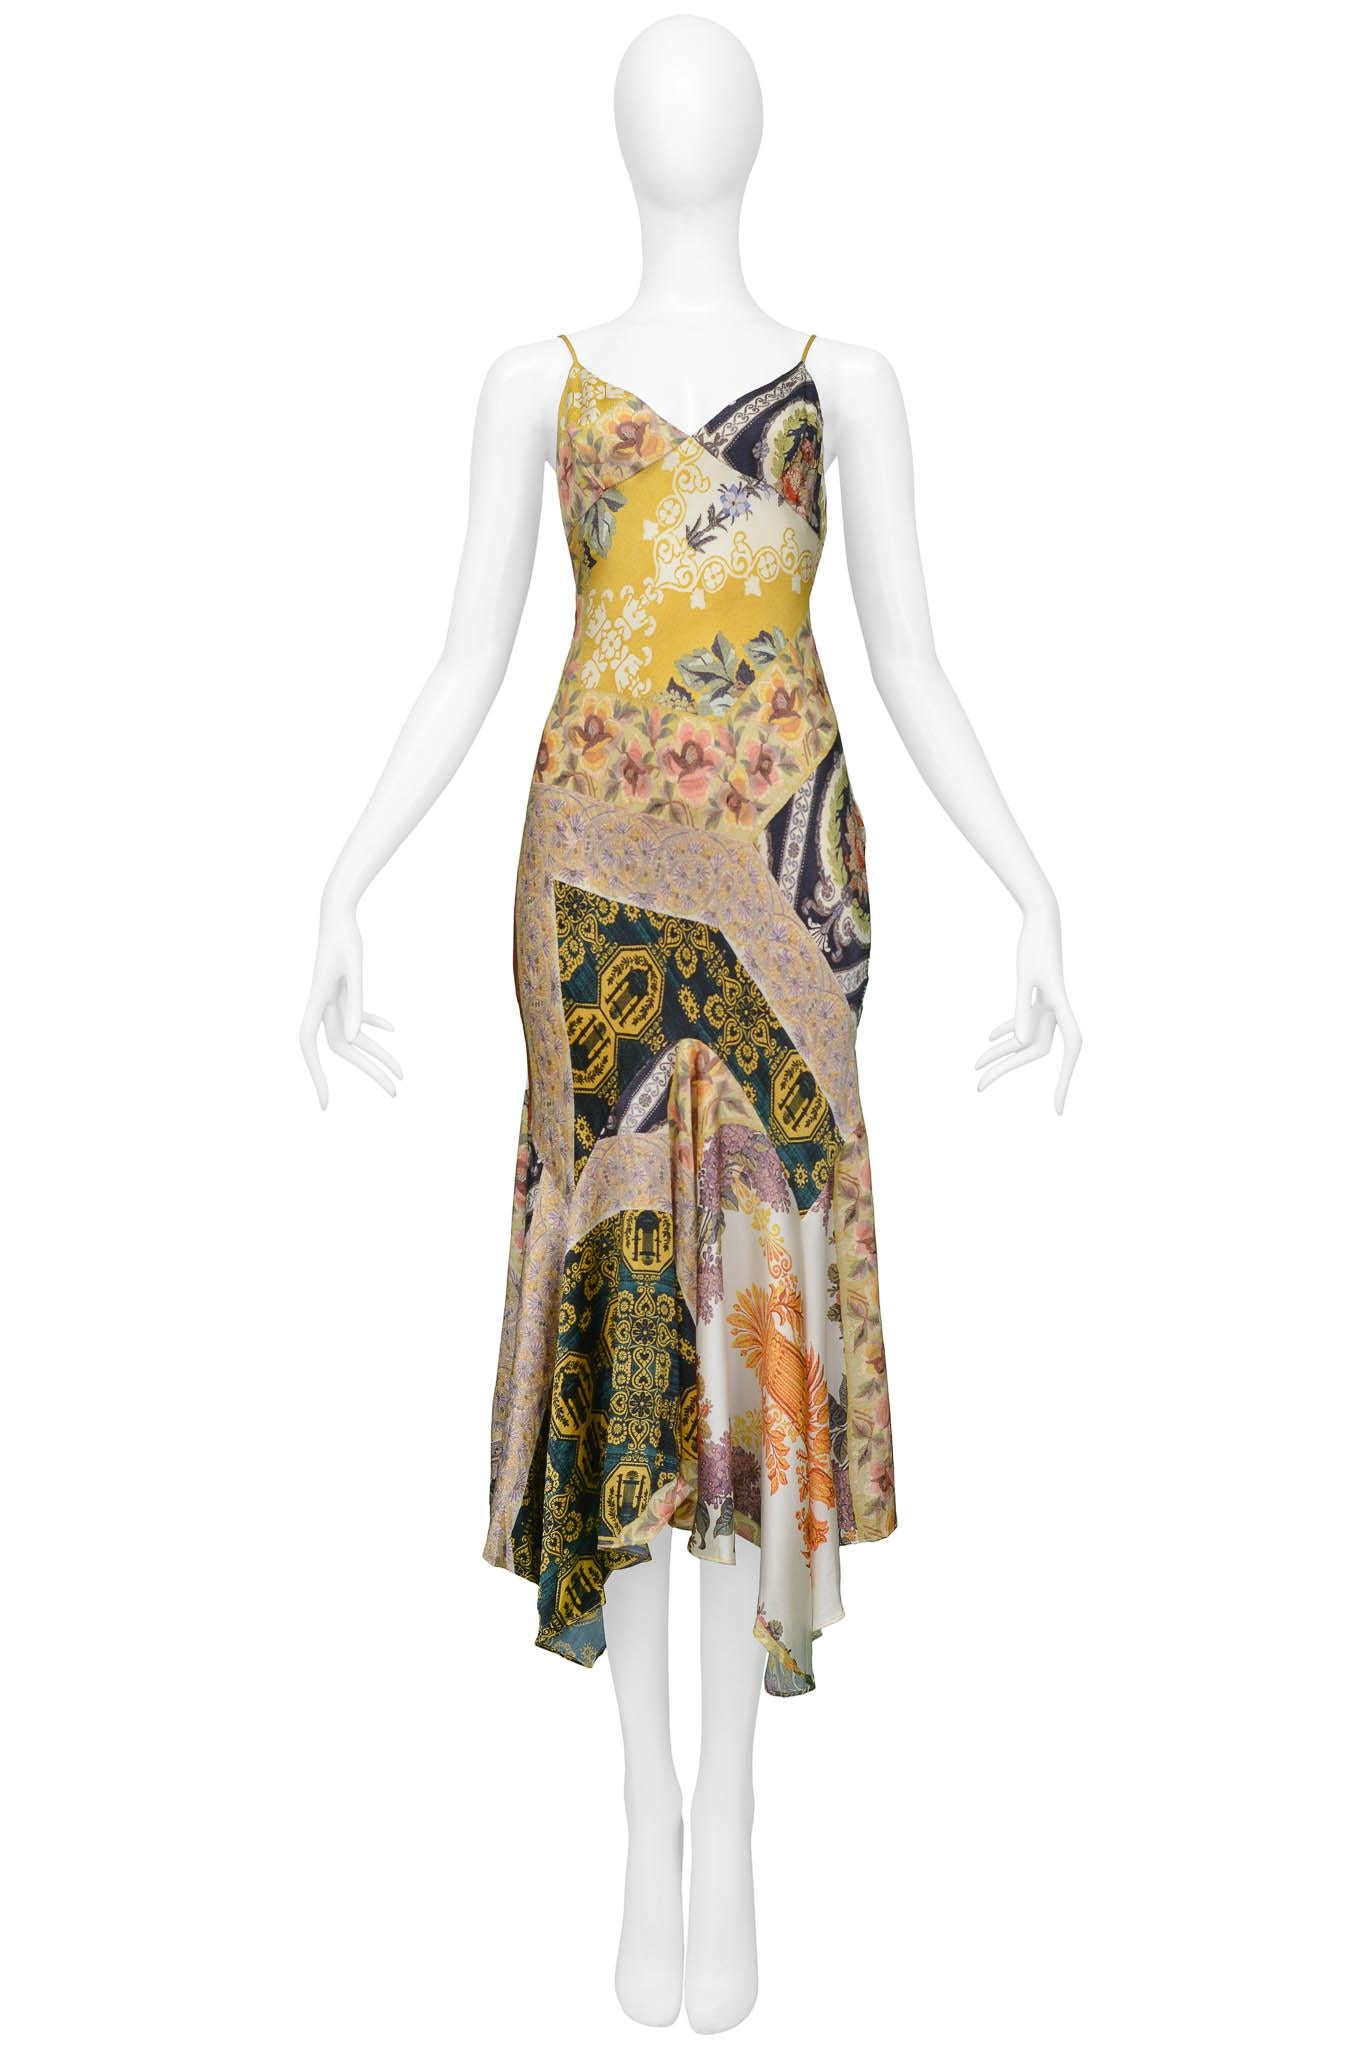 Resurrection Vintage is excited to present a vintage Roberto Cavalli yellow slip dress featuring thin straps, a mid-length hem, and an asymmetrical assortment of floral and baroque patterns

Roberto Cavalli
Size: 40
Silk
Excellent Vintage Condition